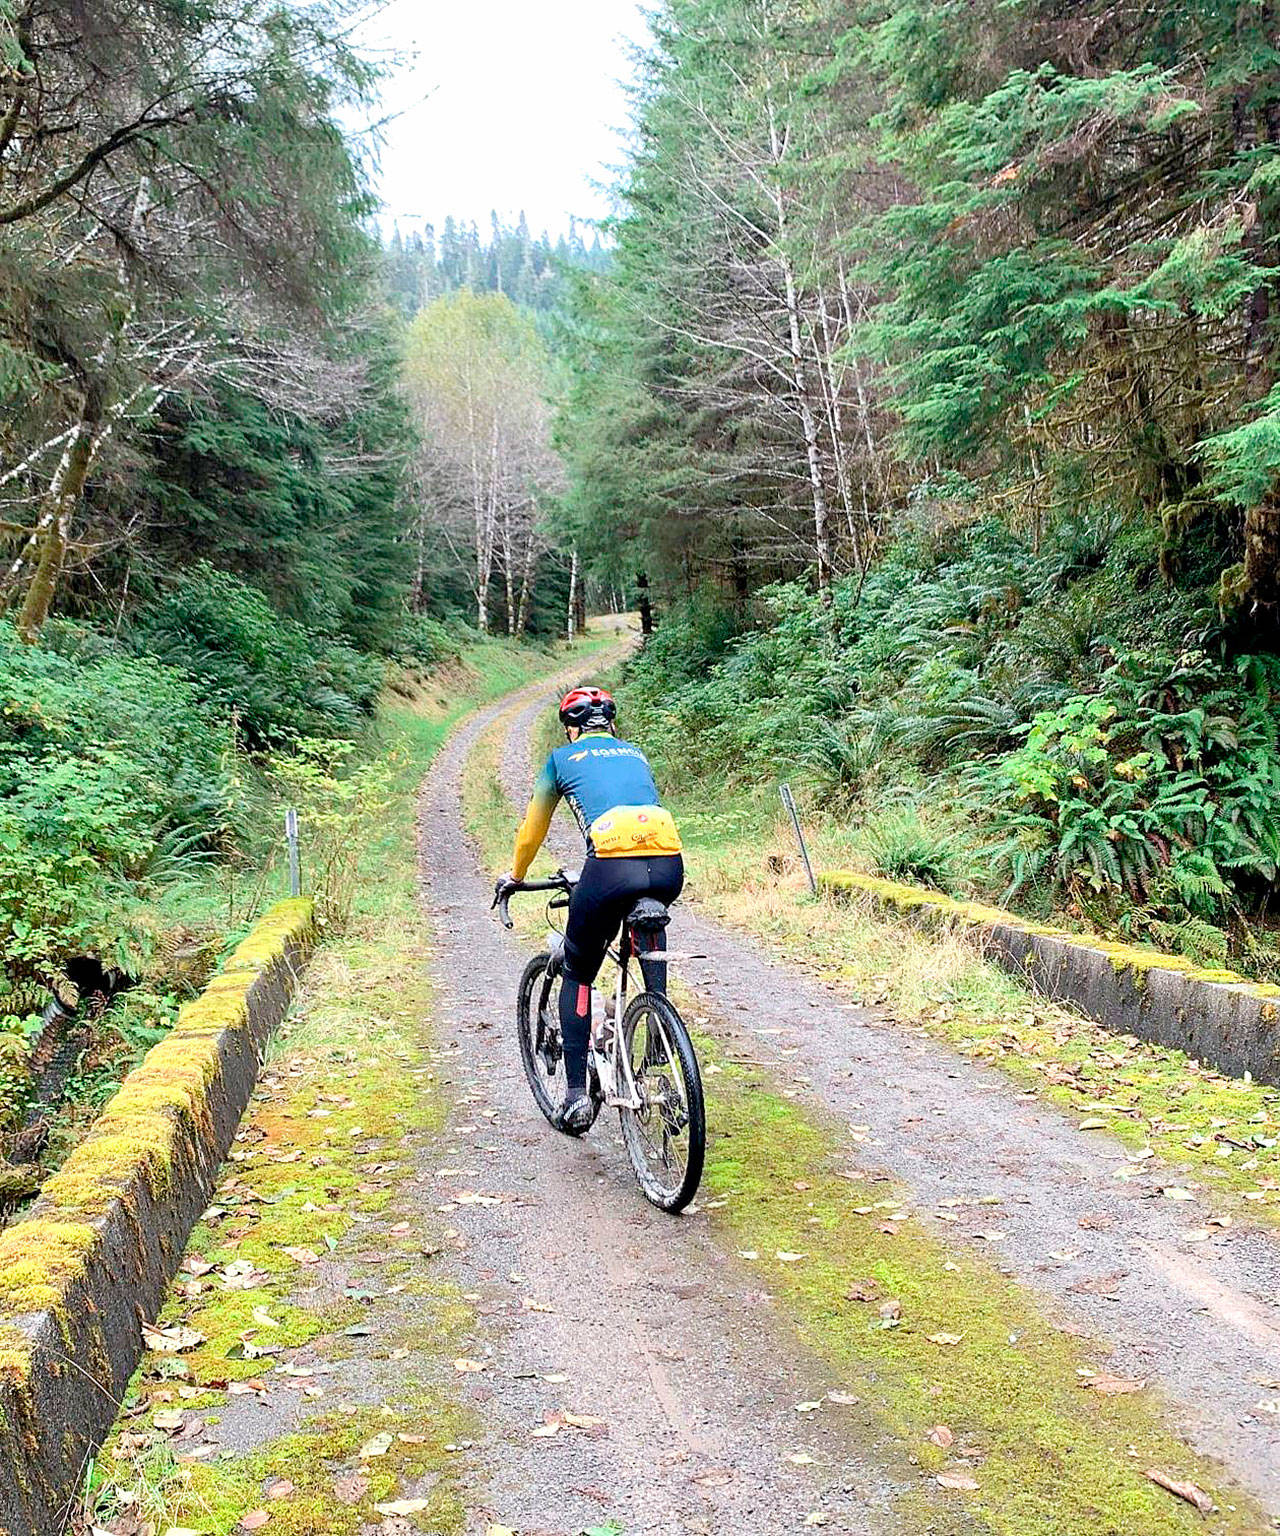 The Gravel Unravel is now a three-race series through the Hoh Rainforest, the Sol Duc Valley and the mountains above Quilcene in May and June. (Roger Burton)